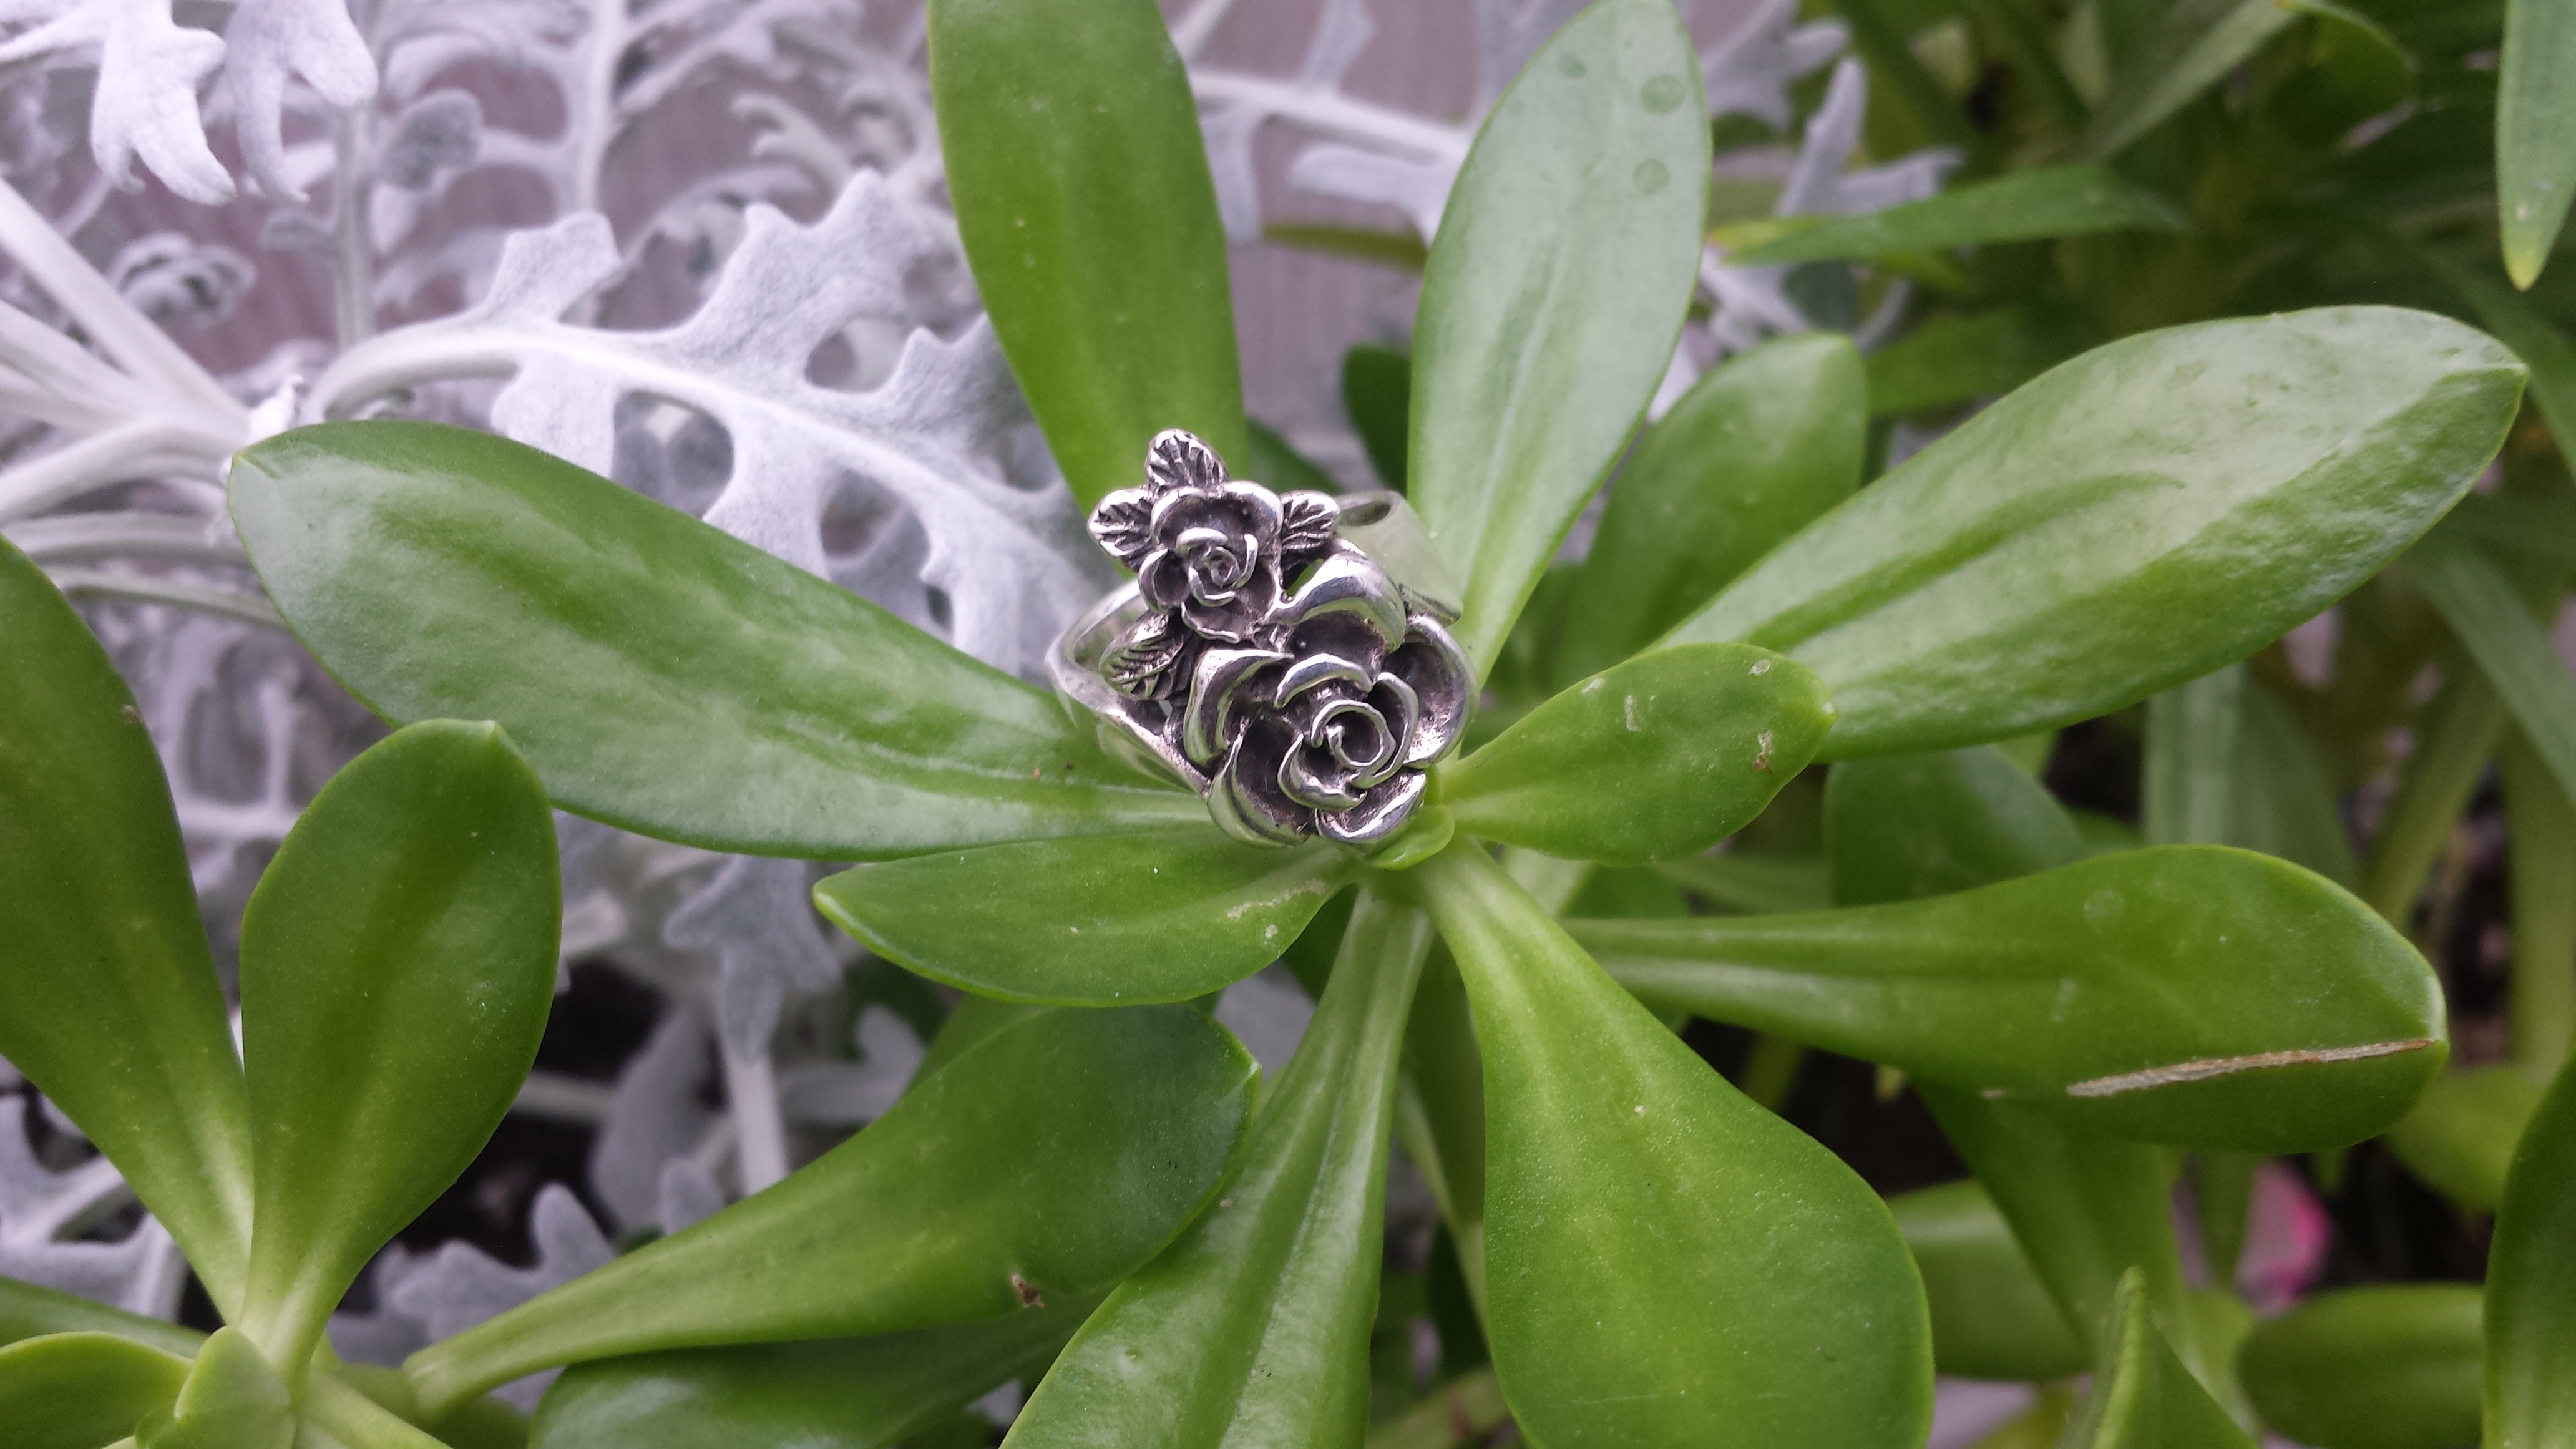 WONDERFUL ROSES RING WITH 925 STERLING SILVER. 7 G